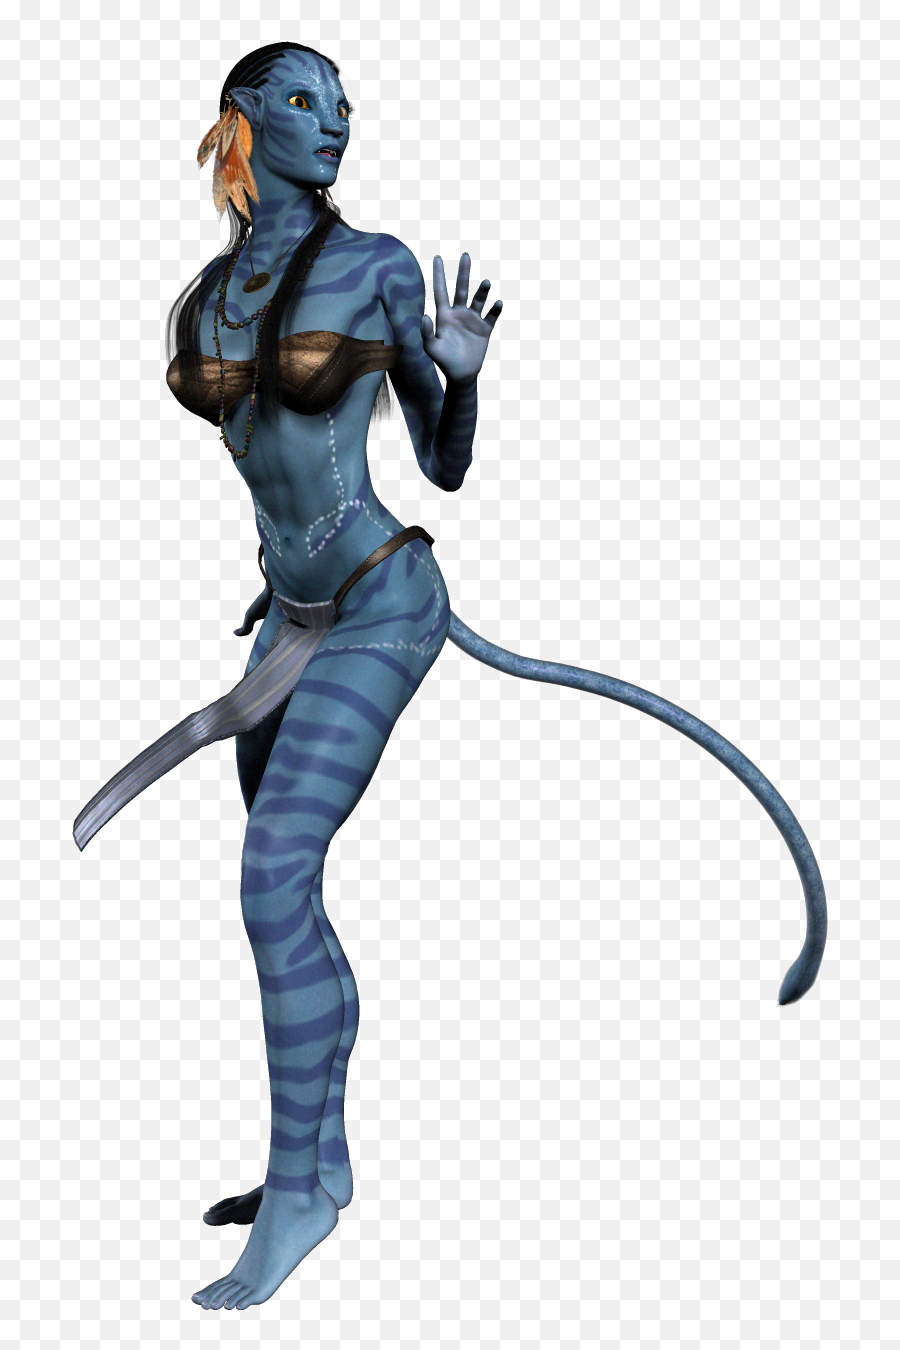 Download Hd Avatar Neytiri Png Image - Avatar Movie Png,Sully Png